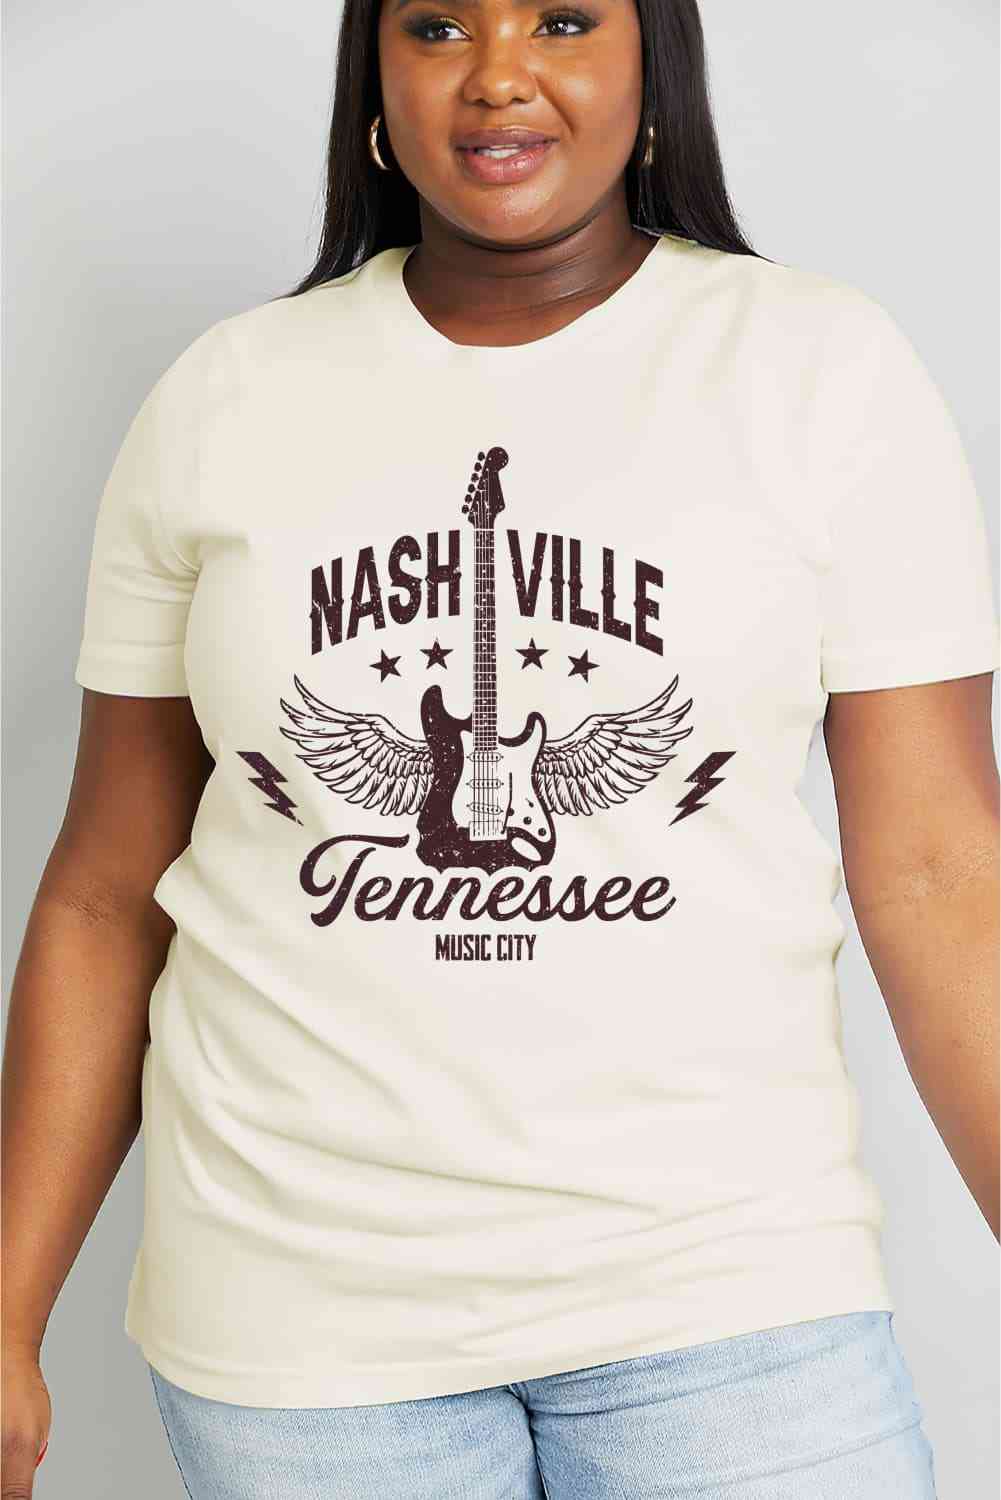 NASHVILLE TENNESSEE MUSIC CITY Graphic Cotton Tee - T-Shirts - Shirts & Tops - 5 - 2024